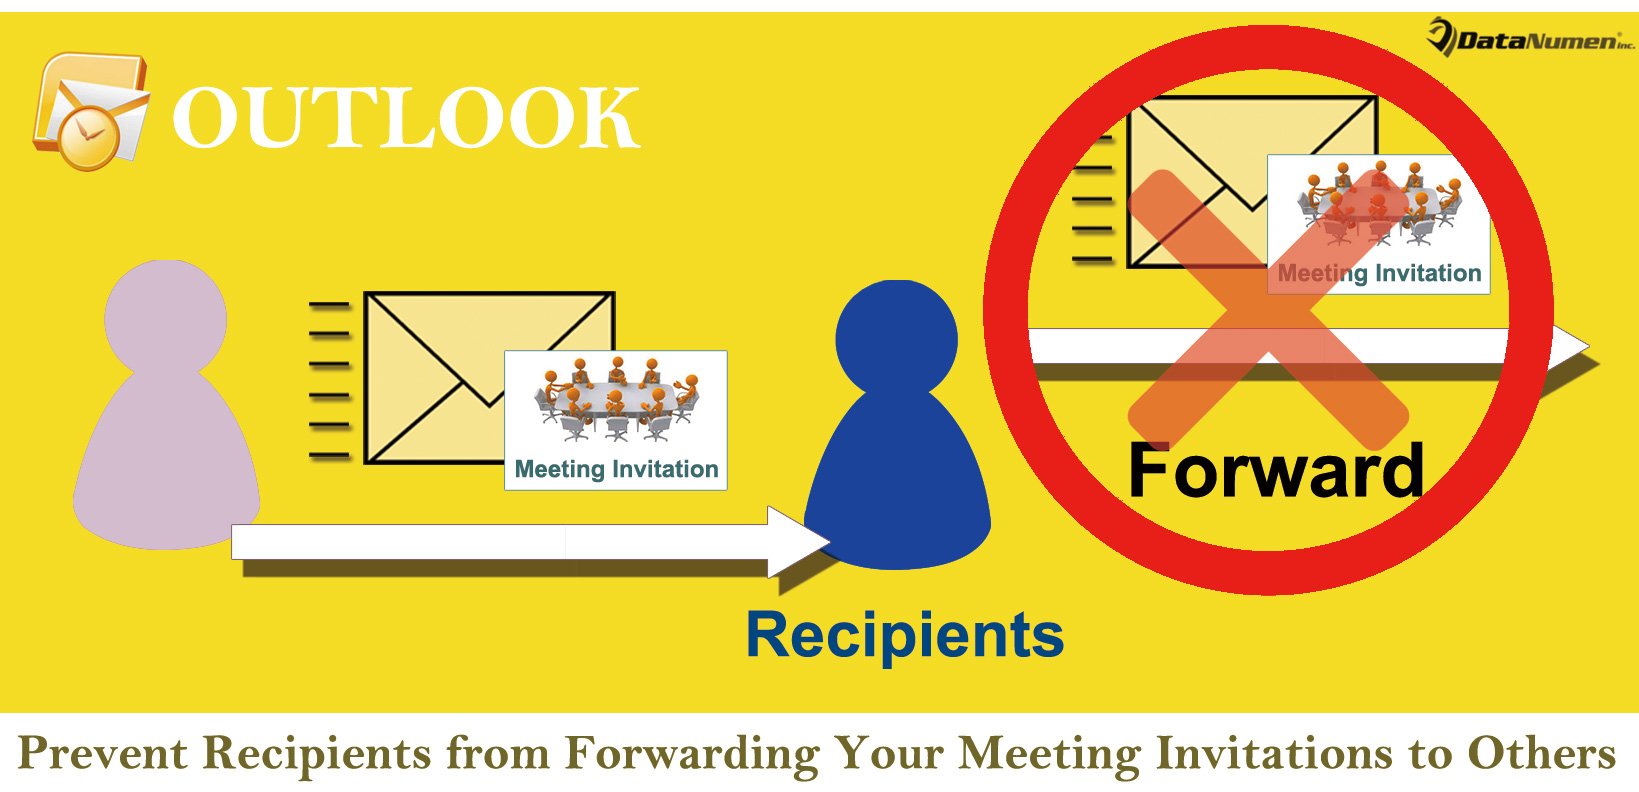 Prevent Recipients from Forwarding Your Meeting Invitations to Others